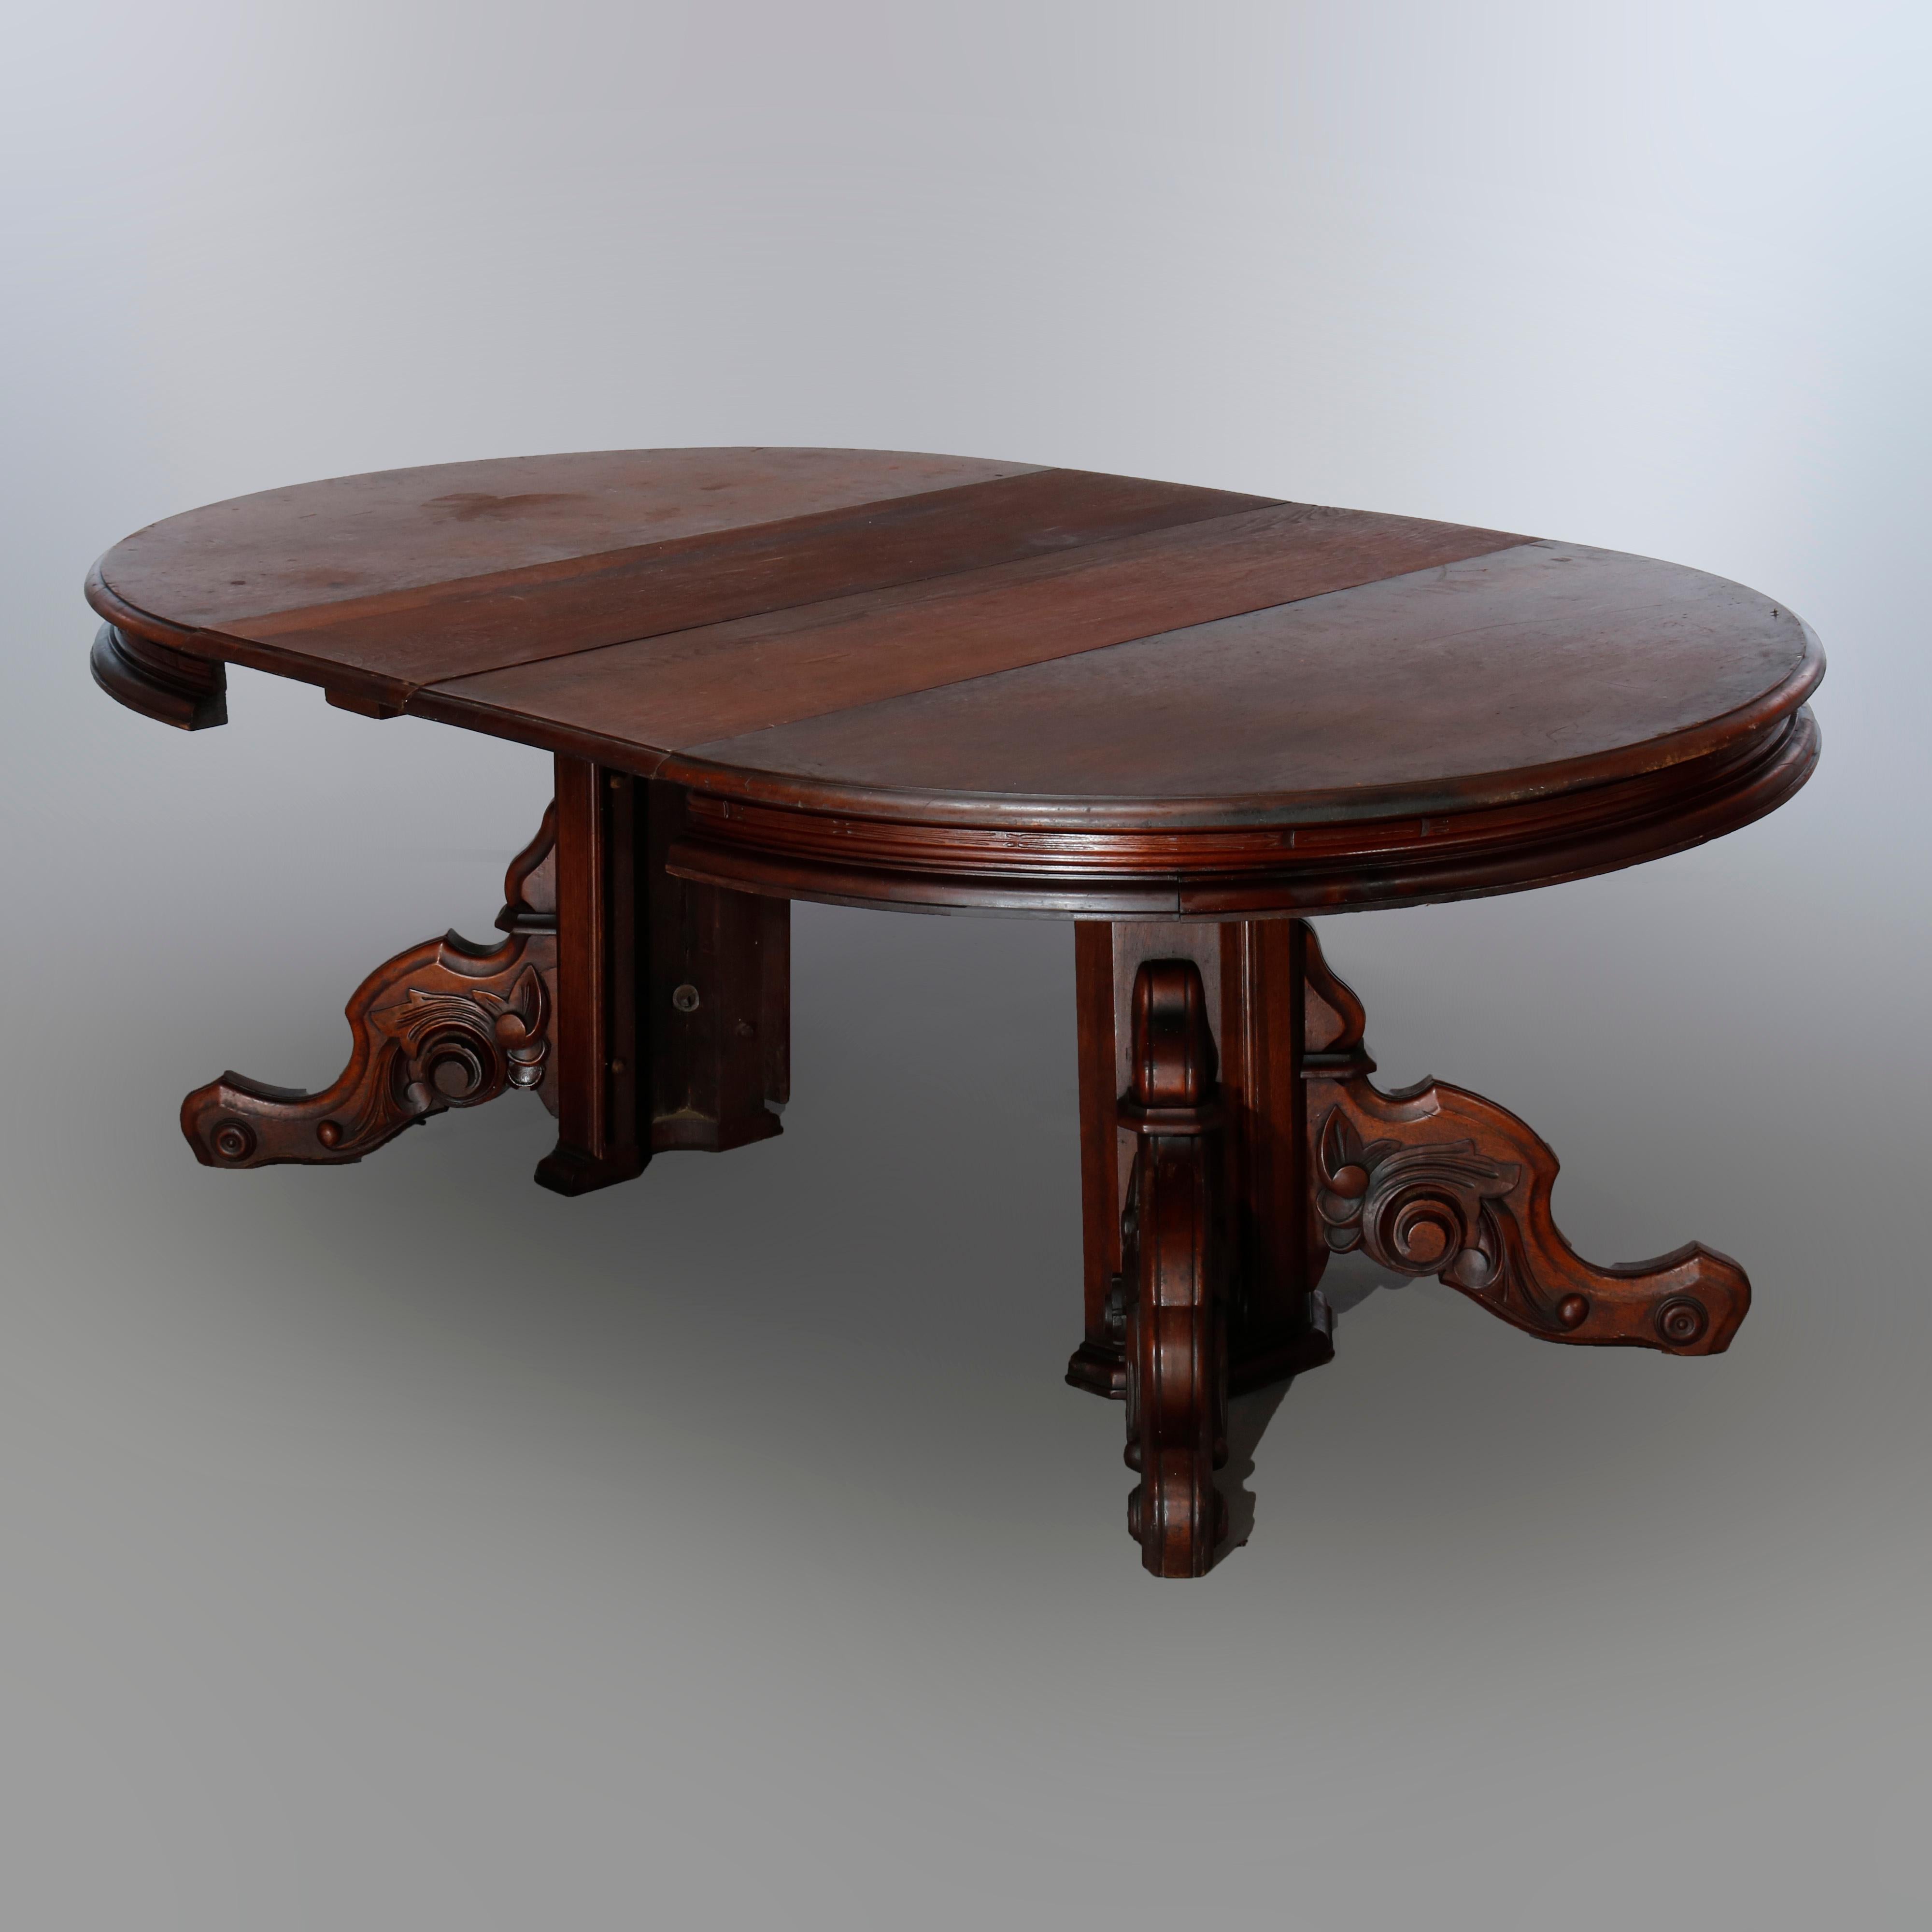 Antique Renaissance Revival Carved Walnut Extension Dining Table & Leaves, c1880 1